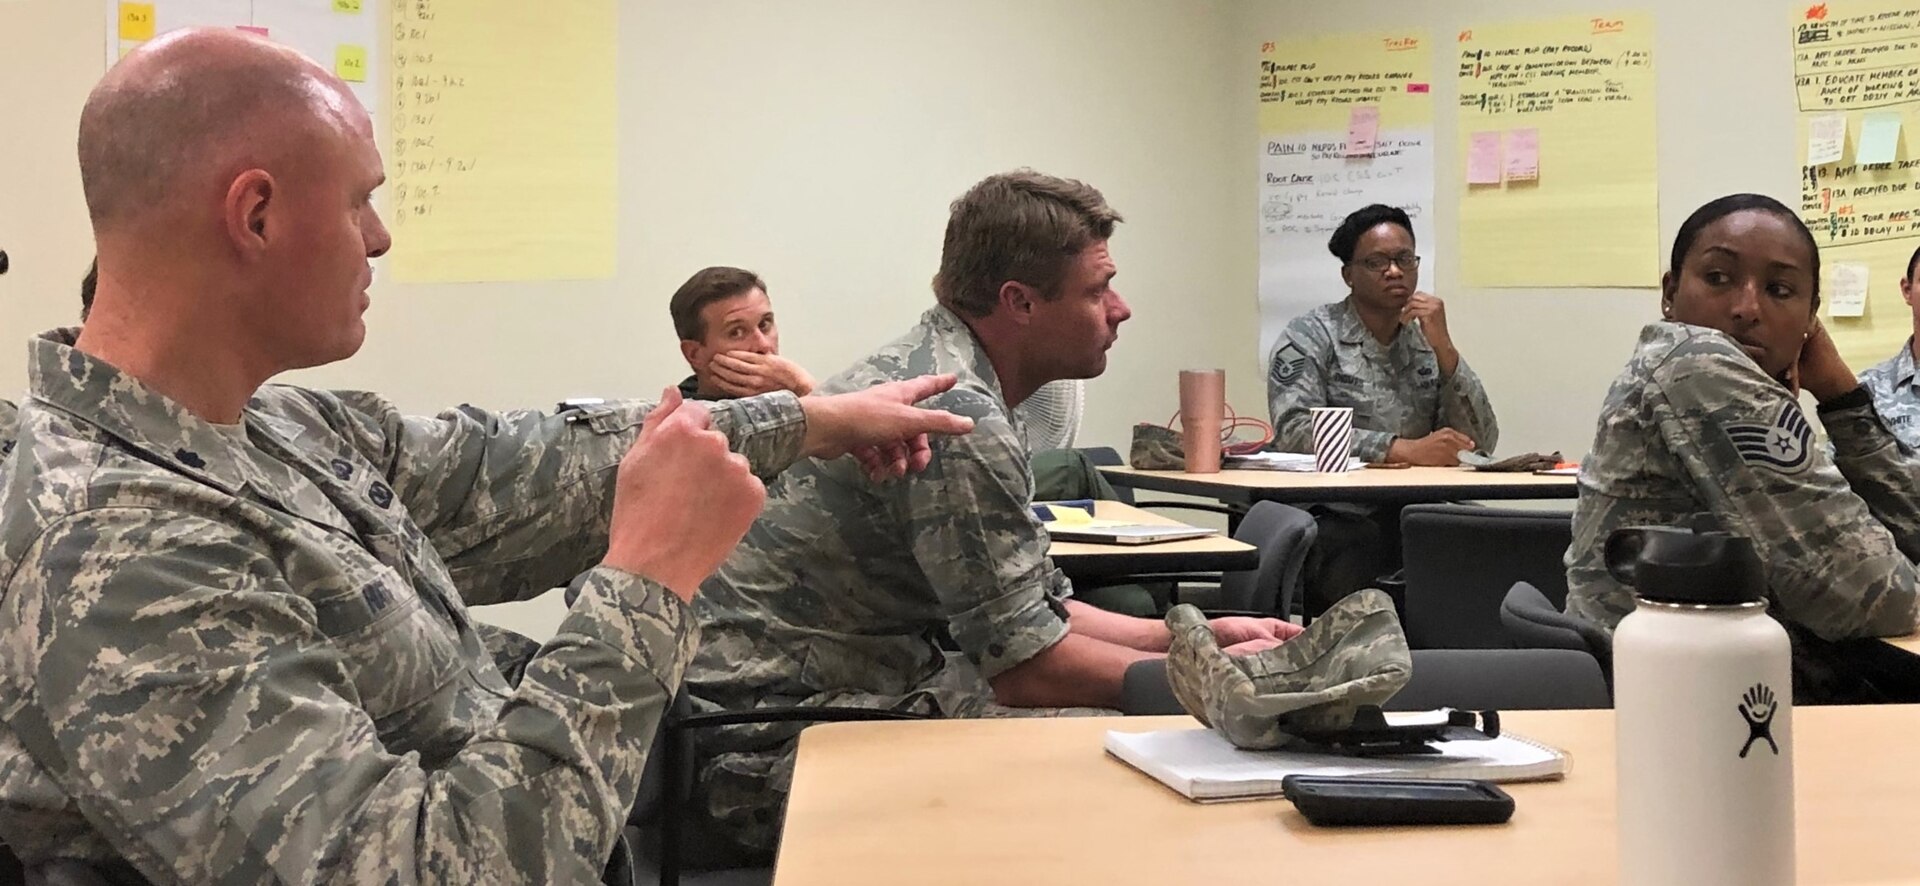 Lt. Col. Mark Hiatt, 340th Flying Training Group manpower and personnel director (left), discusses counter measures with group members at the Nov. 19-21 continuous process improvement event held at Joint Base San Antonio-Randolph, Texas, to address pay issues that occur when Reserve members transition between pay statuses. (U.S. Air Force photo by Janis El Shabazz)